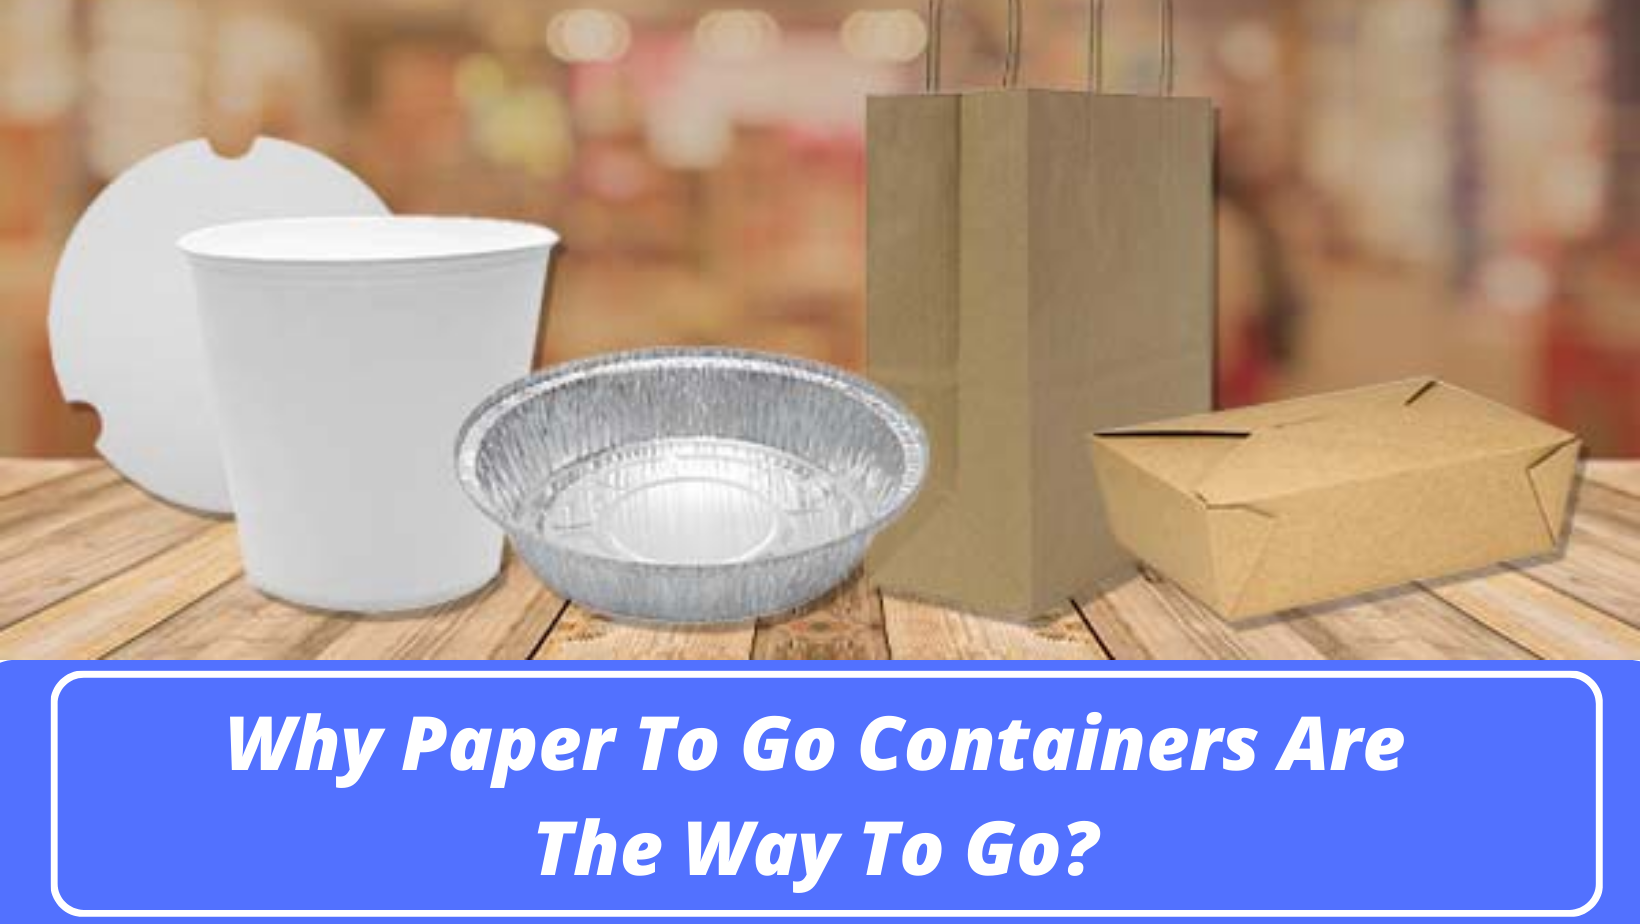 The Benefits of Disposable Restaurant Supplies